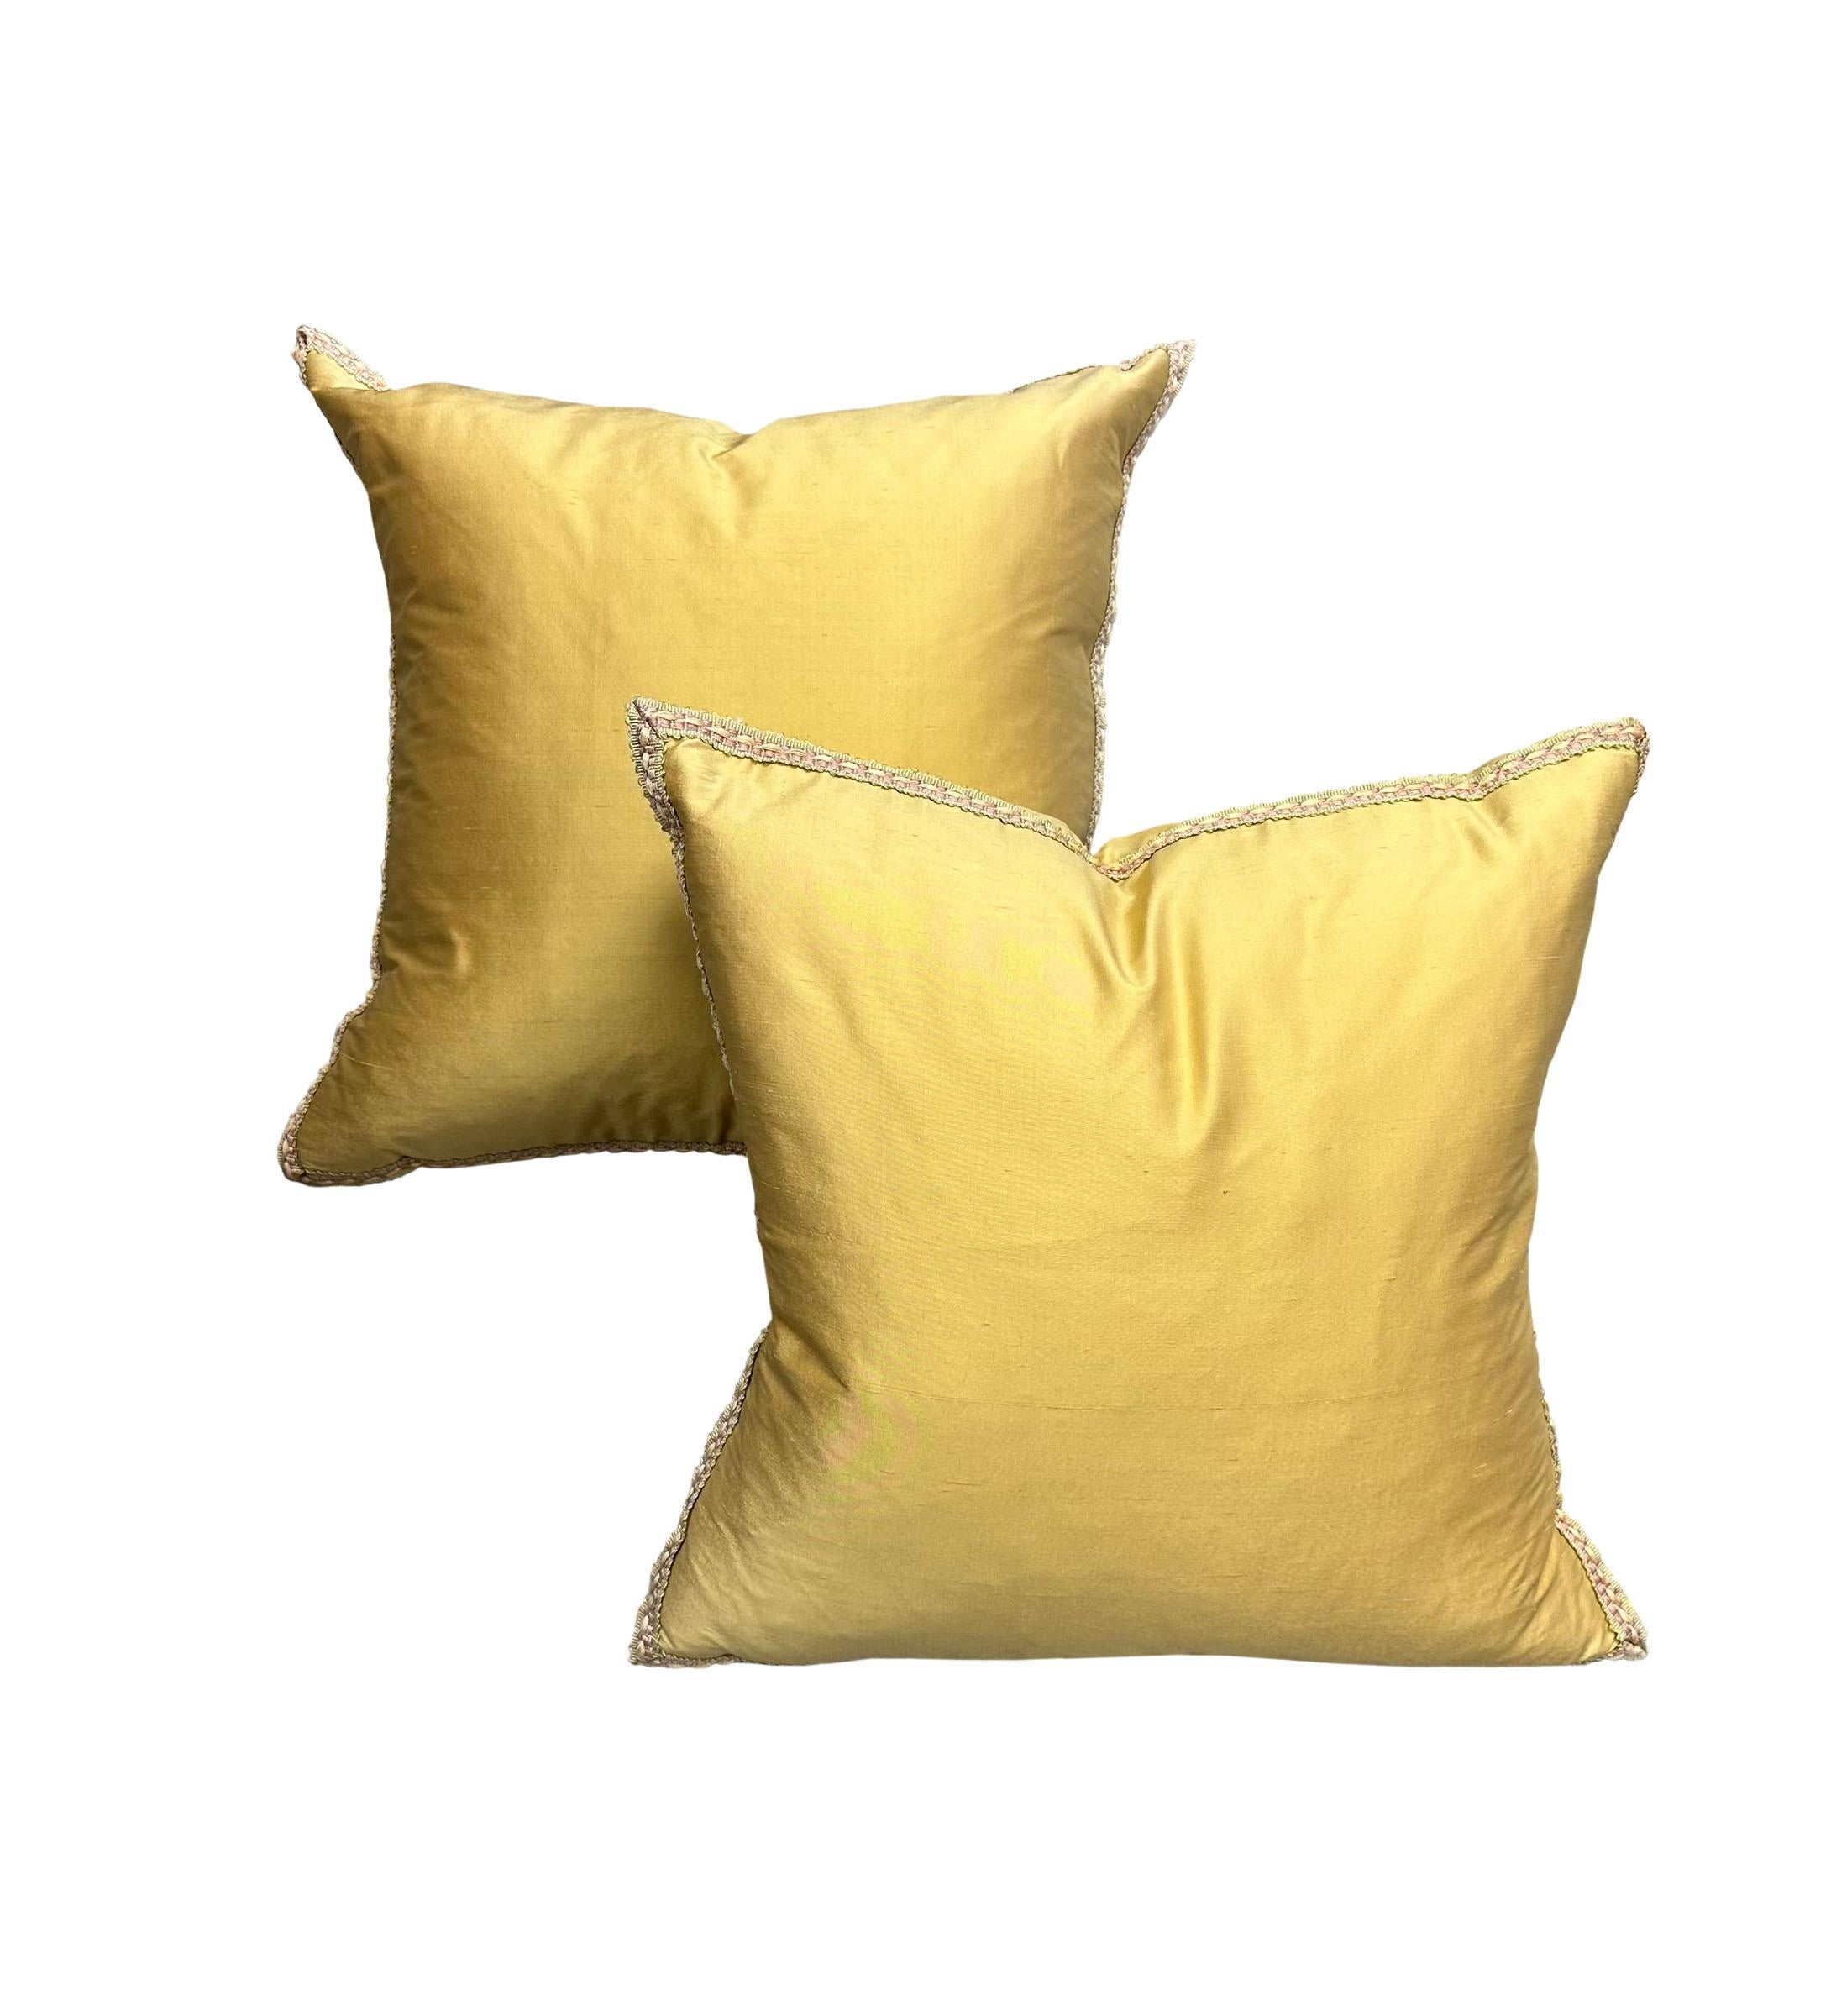 A pair of light gold silk pillows trimmed in a pink and green and yellow trim. They are the same front and back. The silk and trim are Italian, circa 1980s. The pillows are down filled.